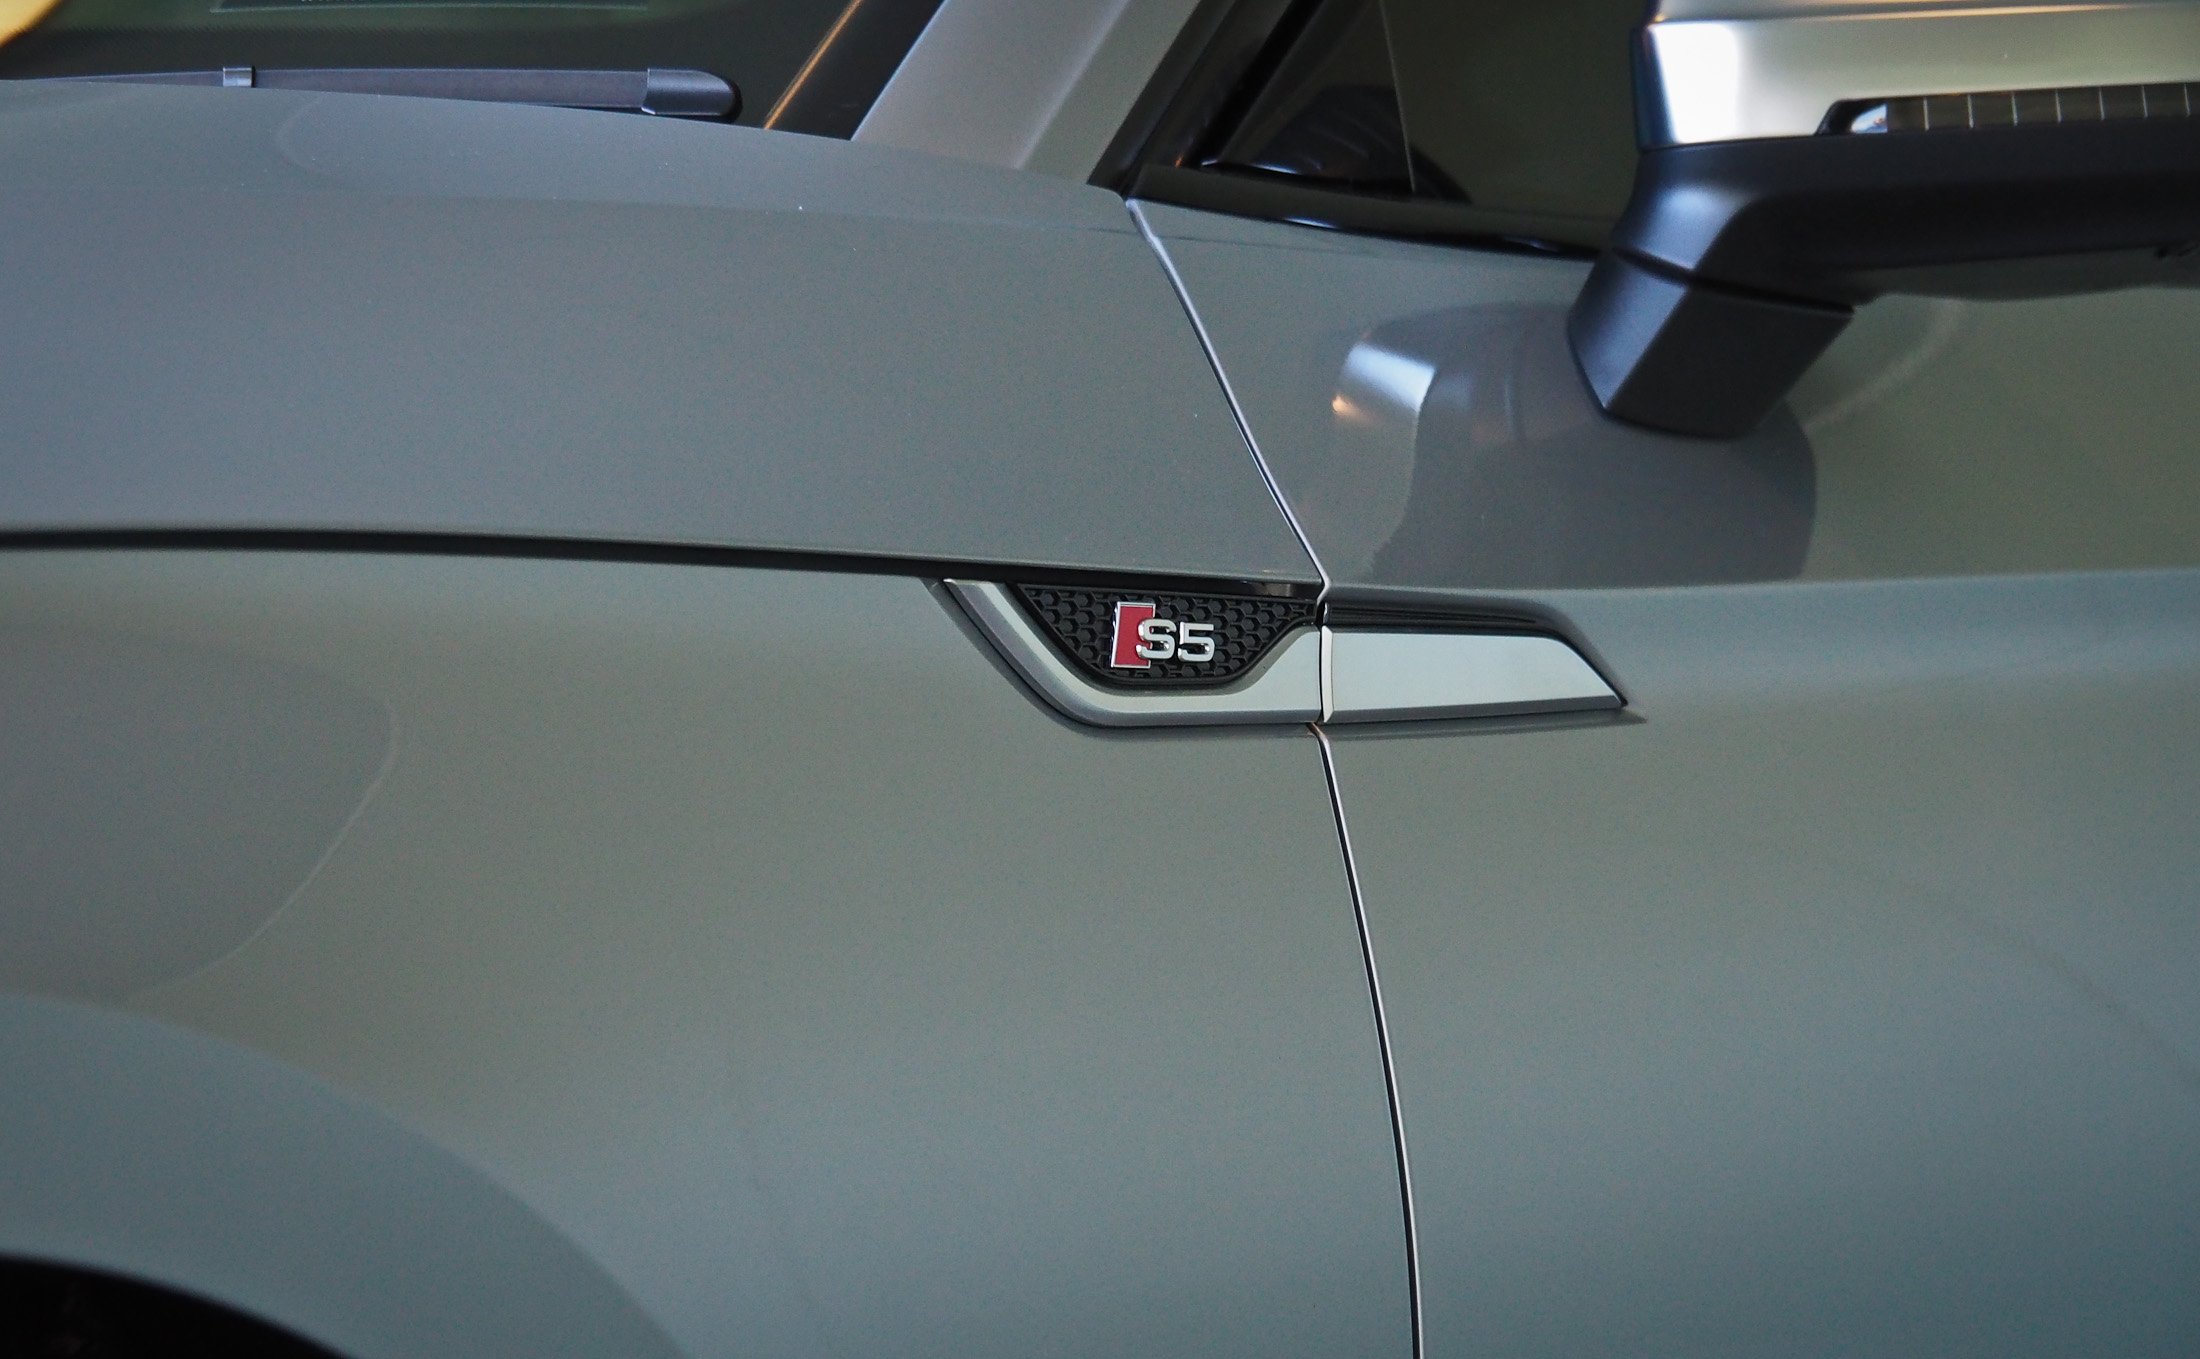 Close up of S5 side badge and reflections of door mirror